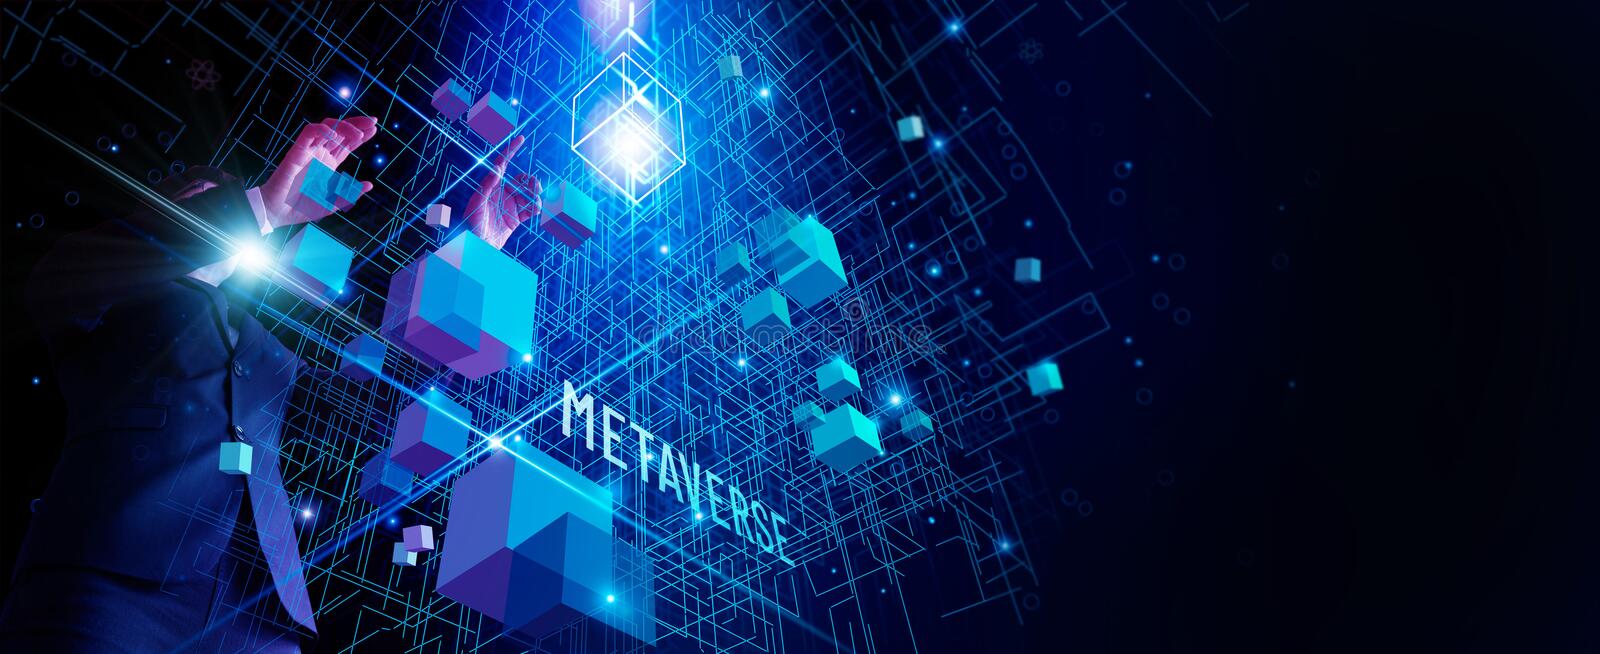 businessman-explore-metaverse-technology-blockchain-network-connecting-computer-generated-environment-user-interface-238853354-d0329616